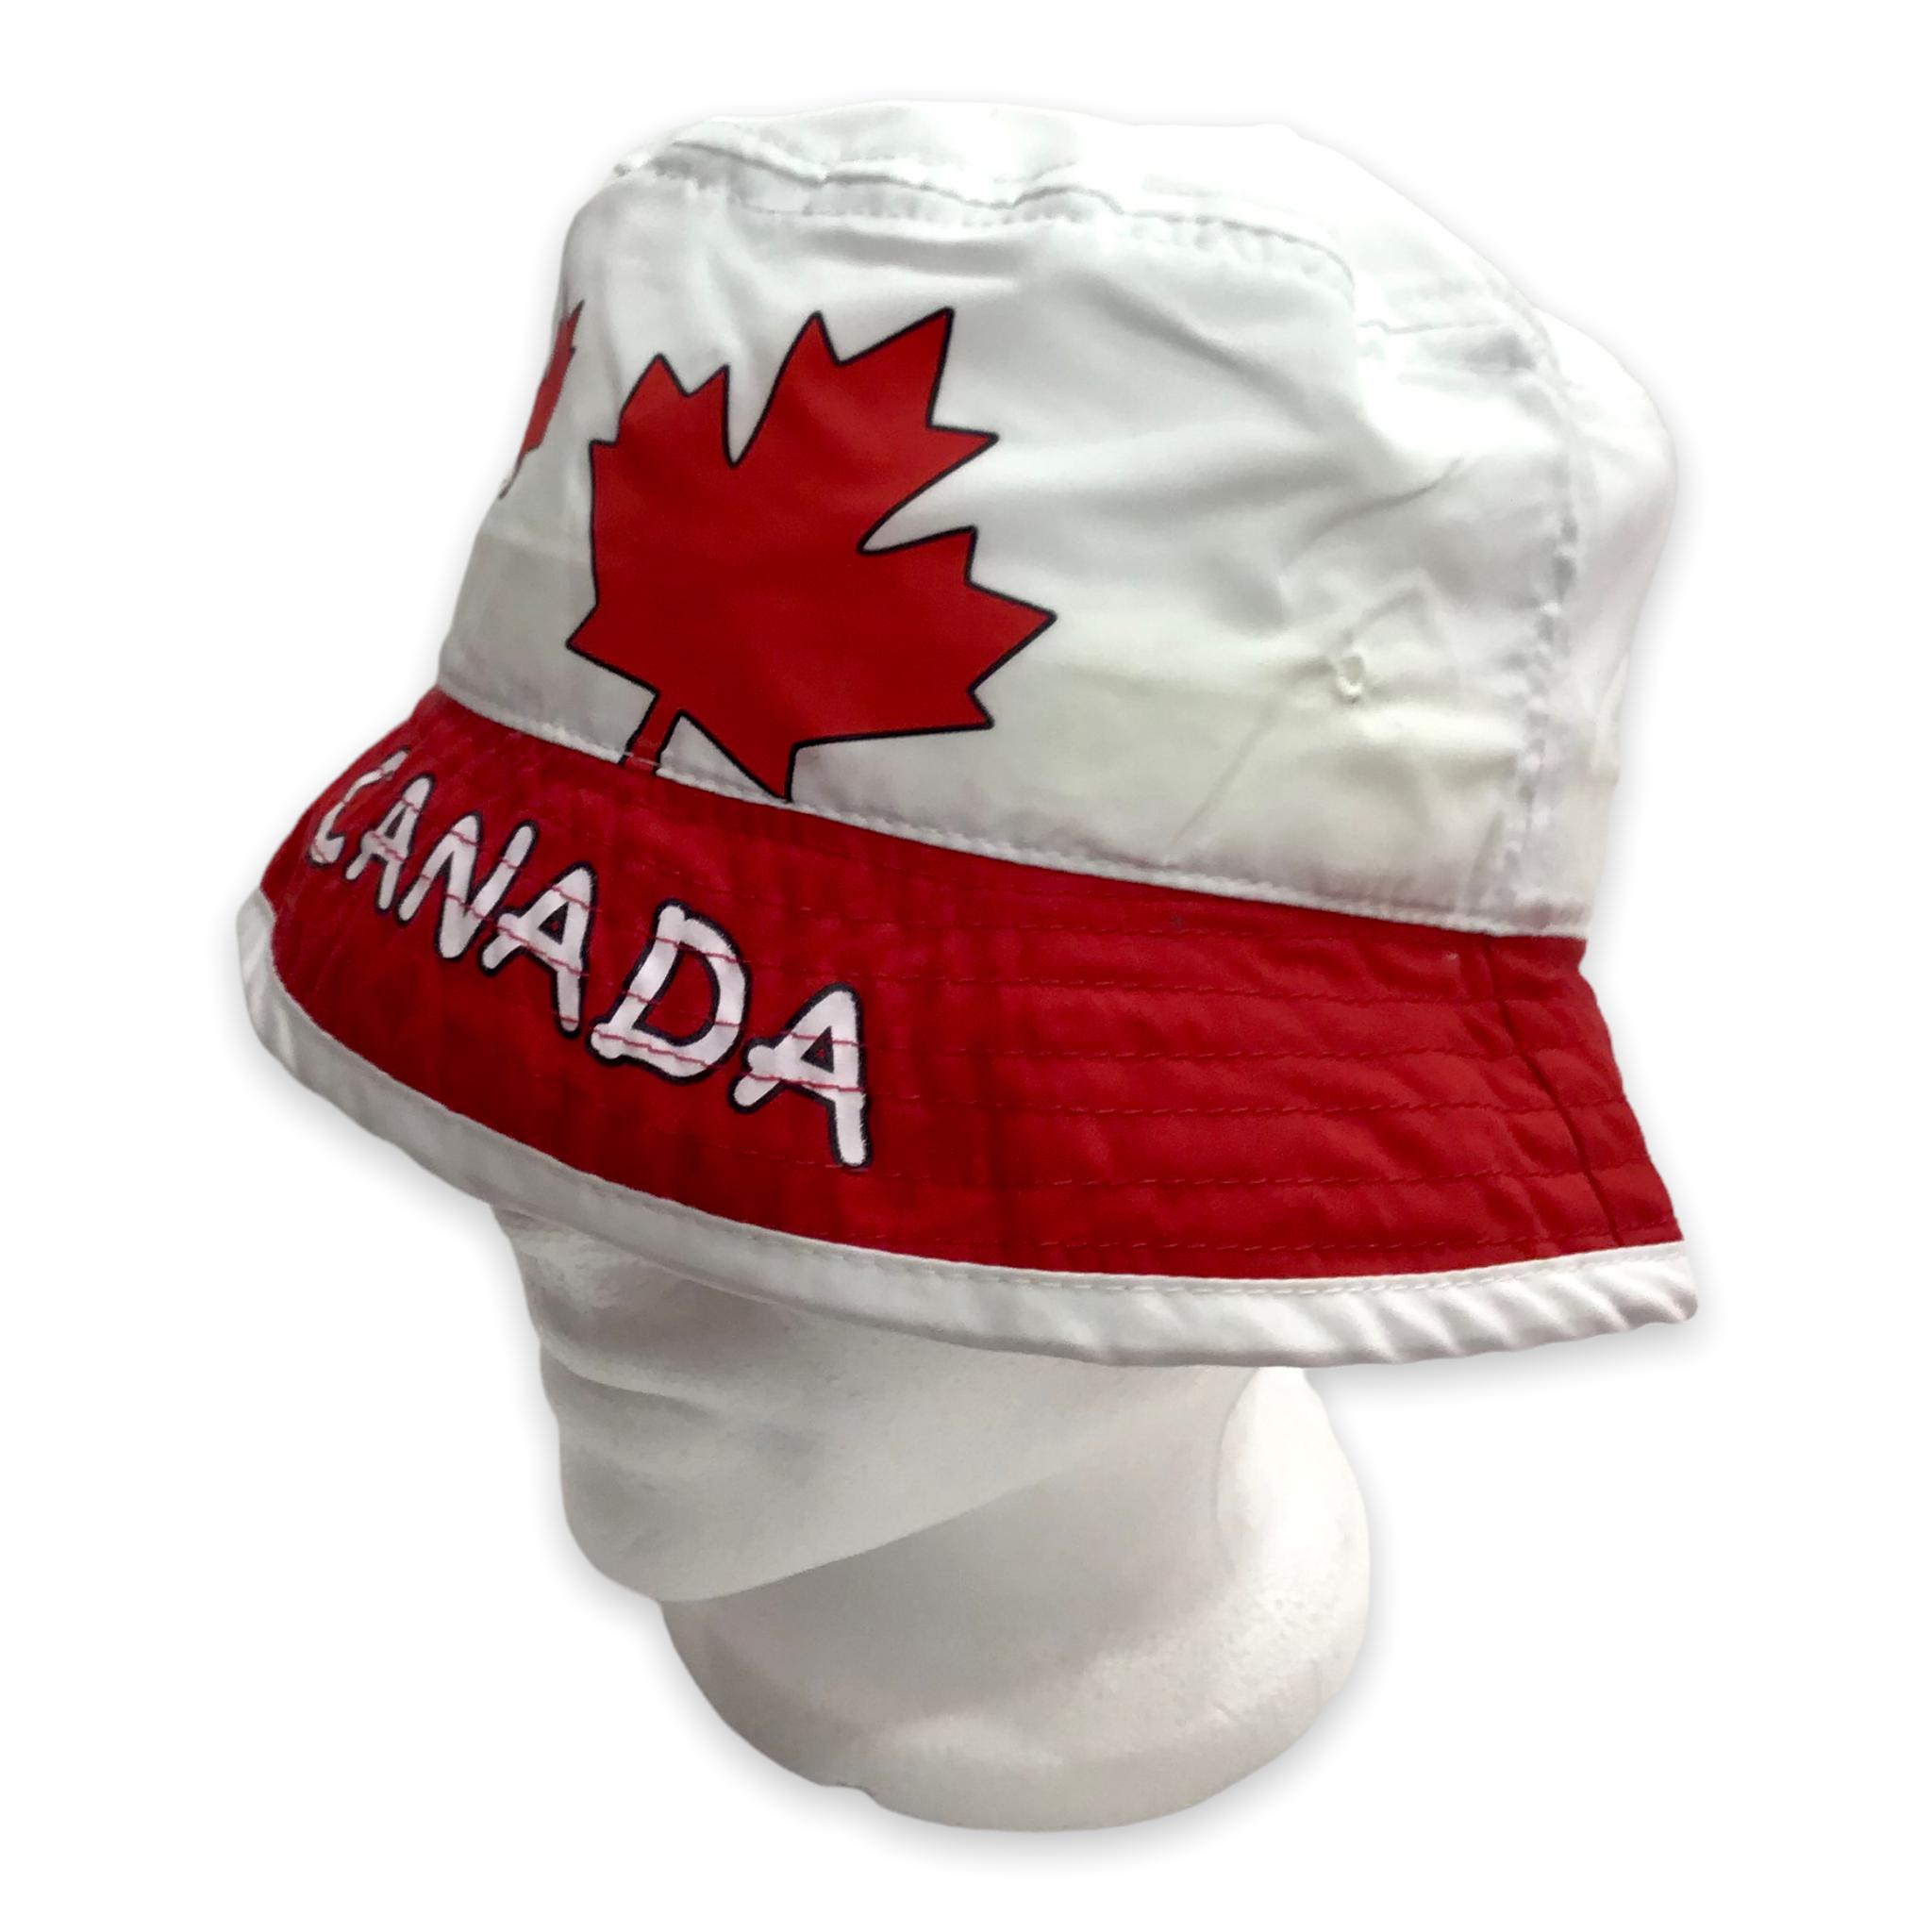 Kids Red and White Canada Bucket Hat with Maple Leaf - Canadian Souvenir Hat